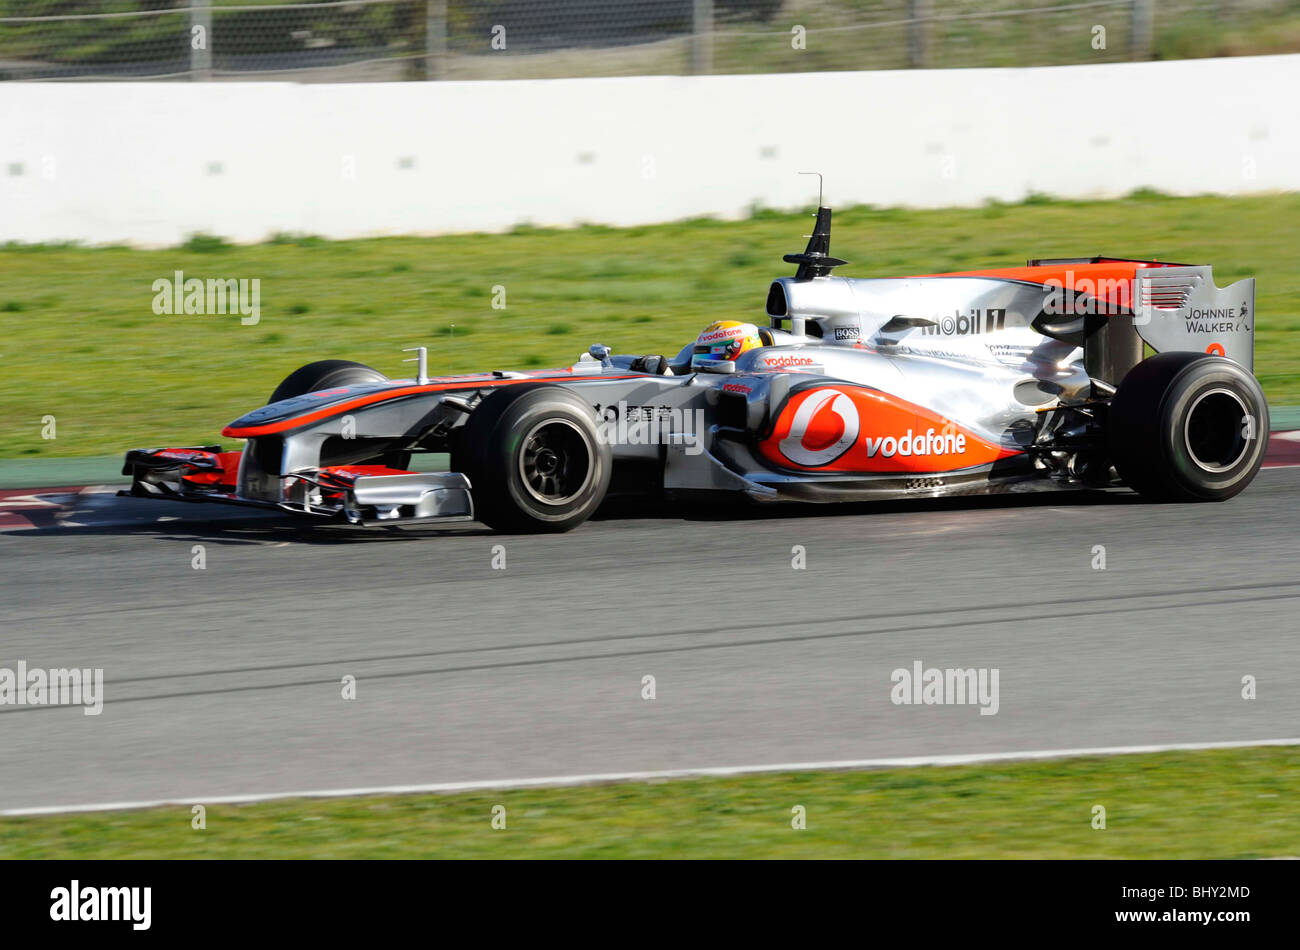 Lewis Hamilton driving for the McLaren–Mercedes team during testing at the Circuit de Catalunya, Montmelo, Spain 2010 Stock Photo